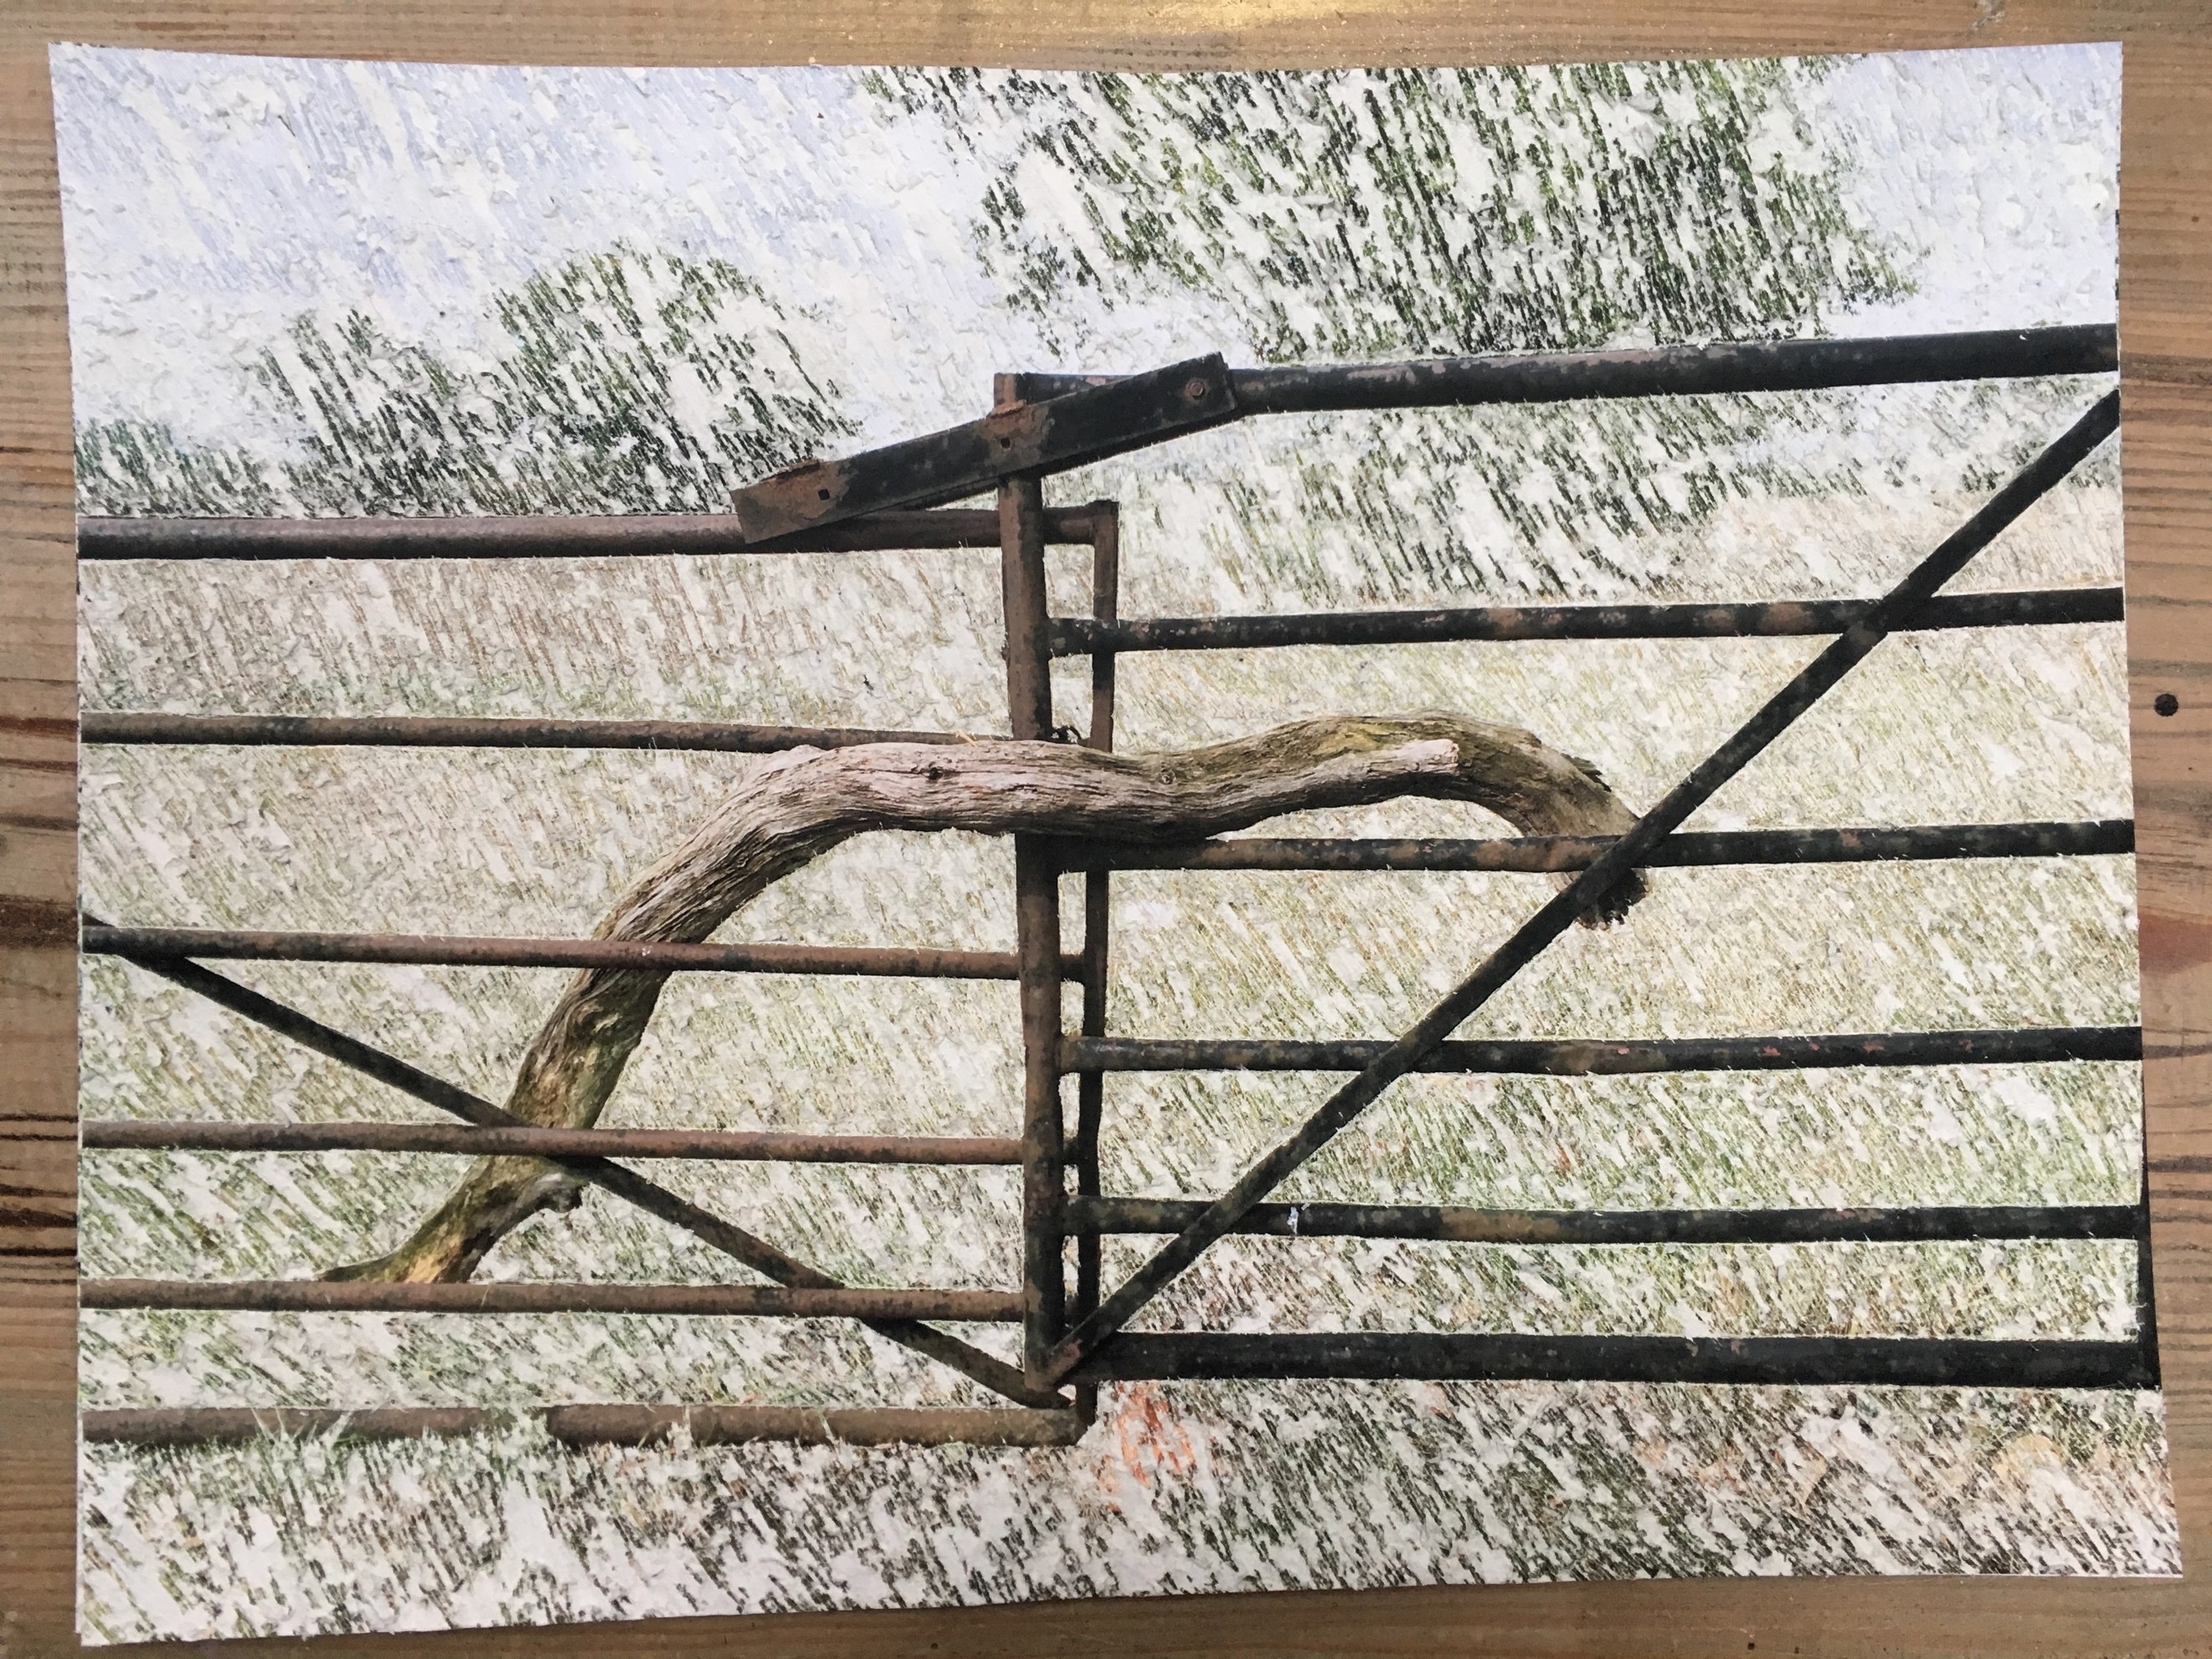 A scratch drawing of a branch being used to hold a metal gate shut